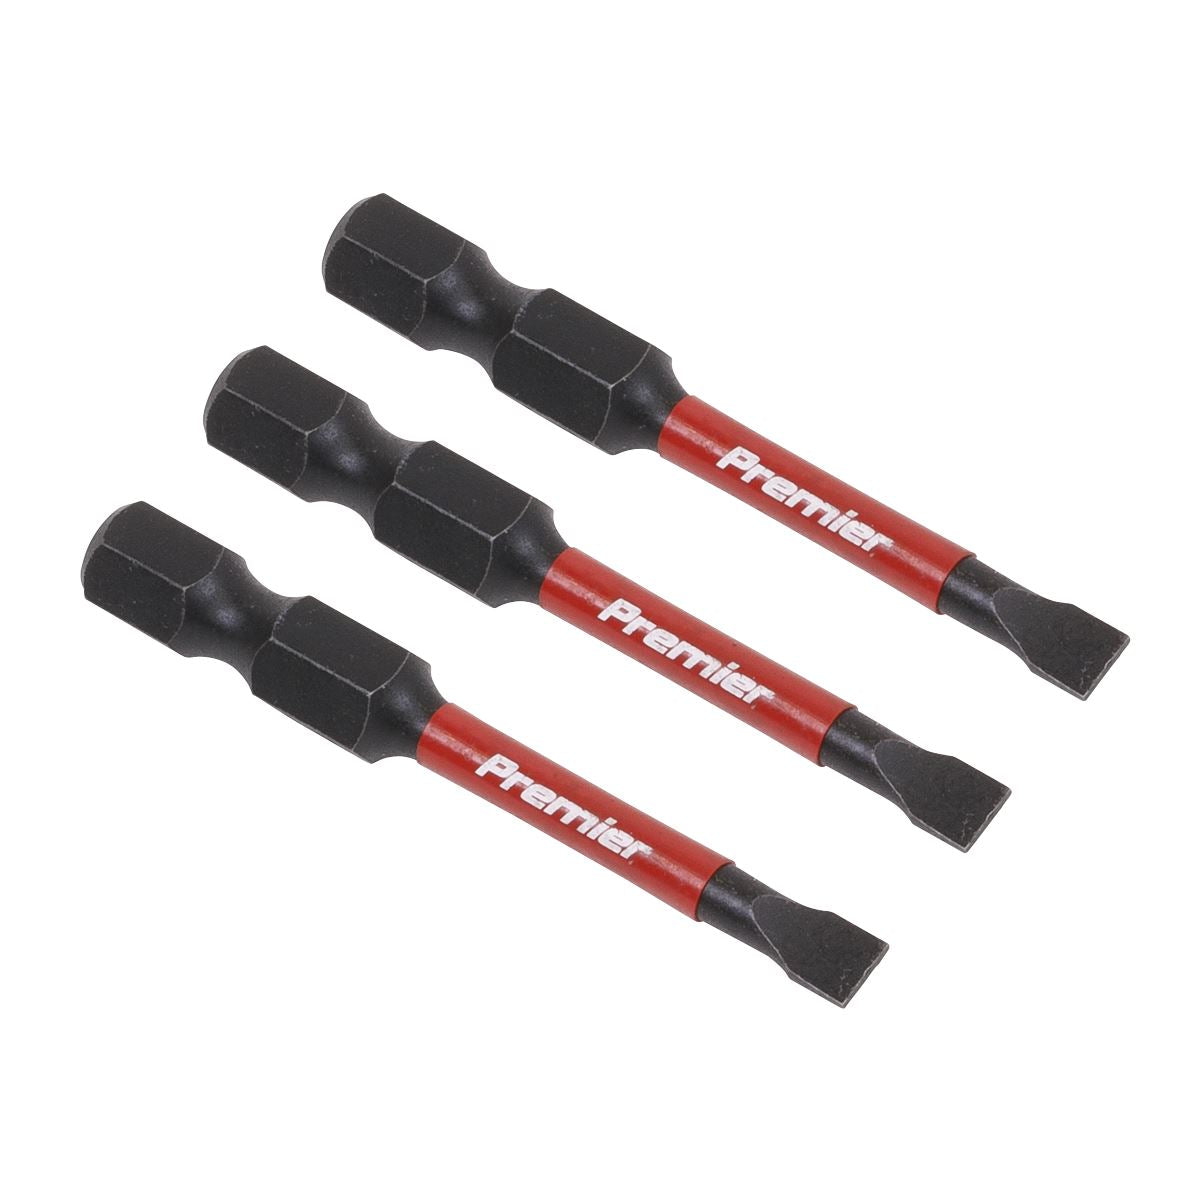 Sealey Premier Slotted 4.5mm Impact Power Tool Bits 50mm - 3pc